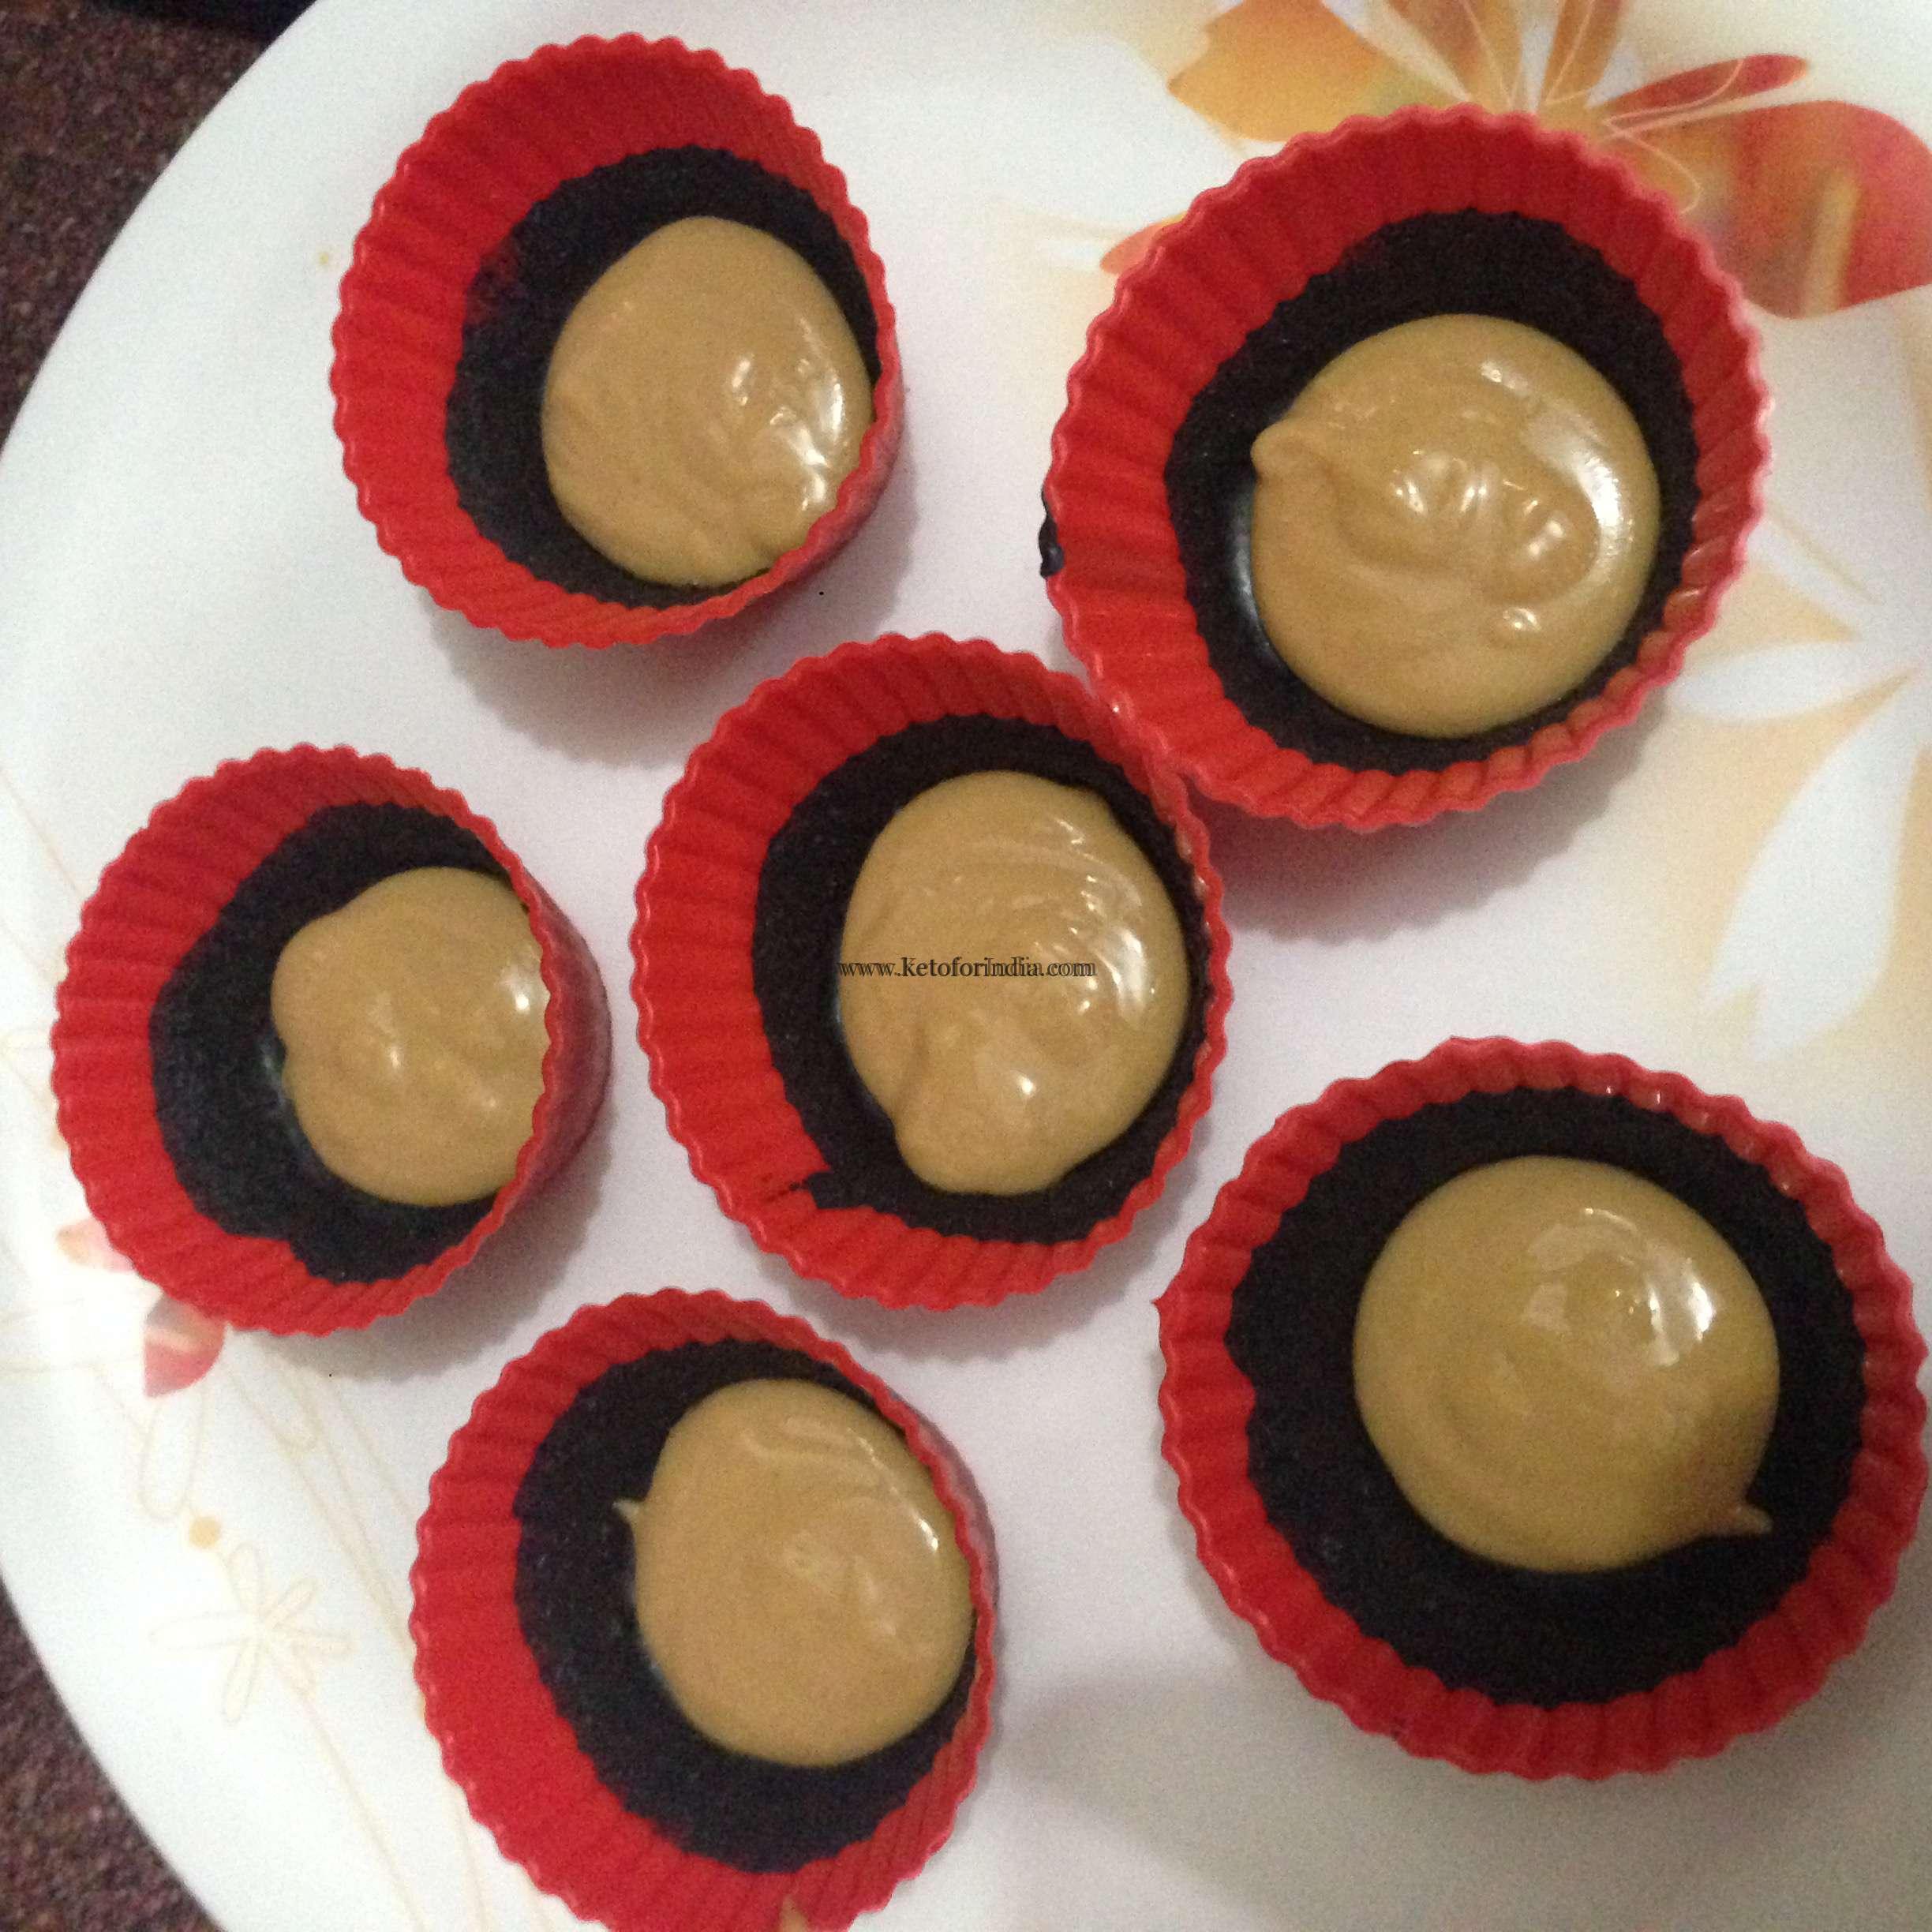 How to make Keto Peanut Butter Cups 